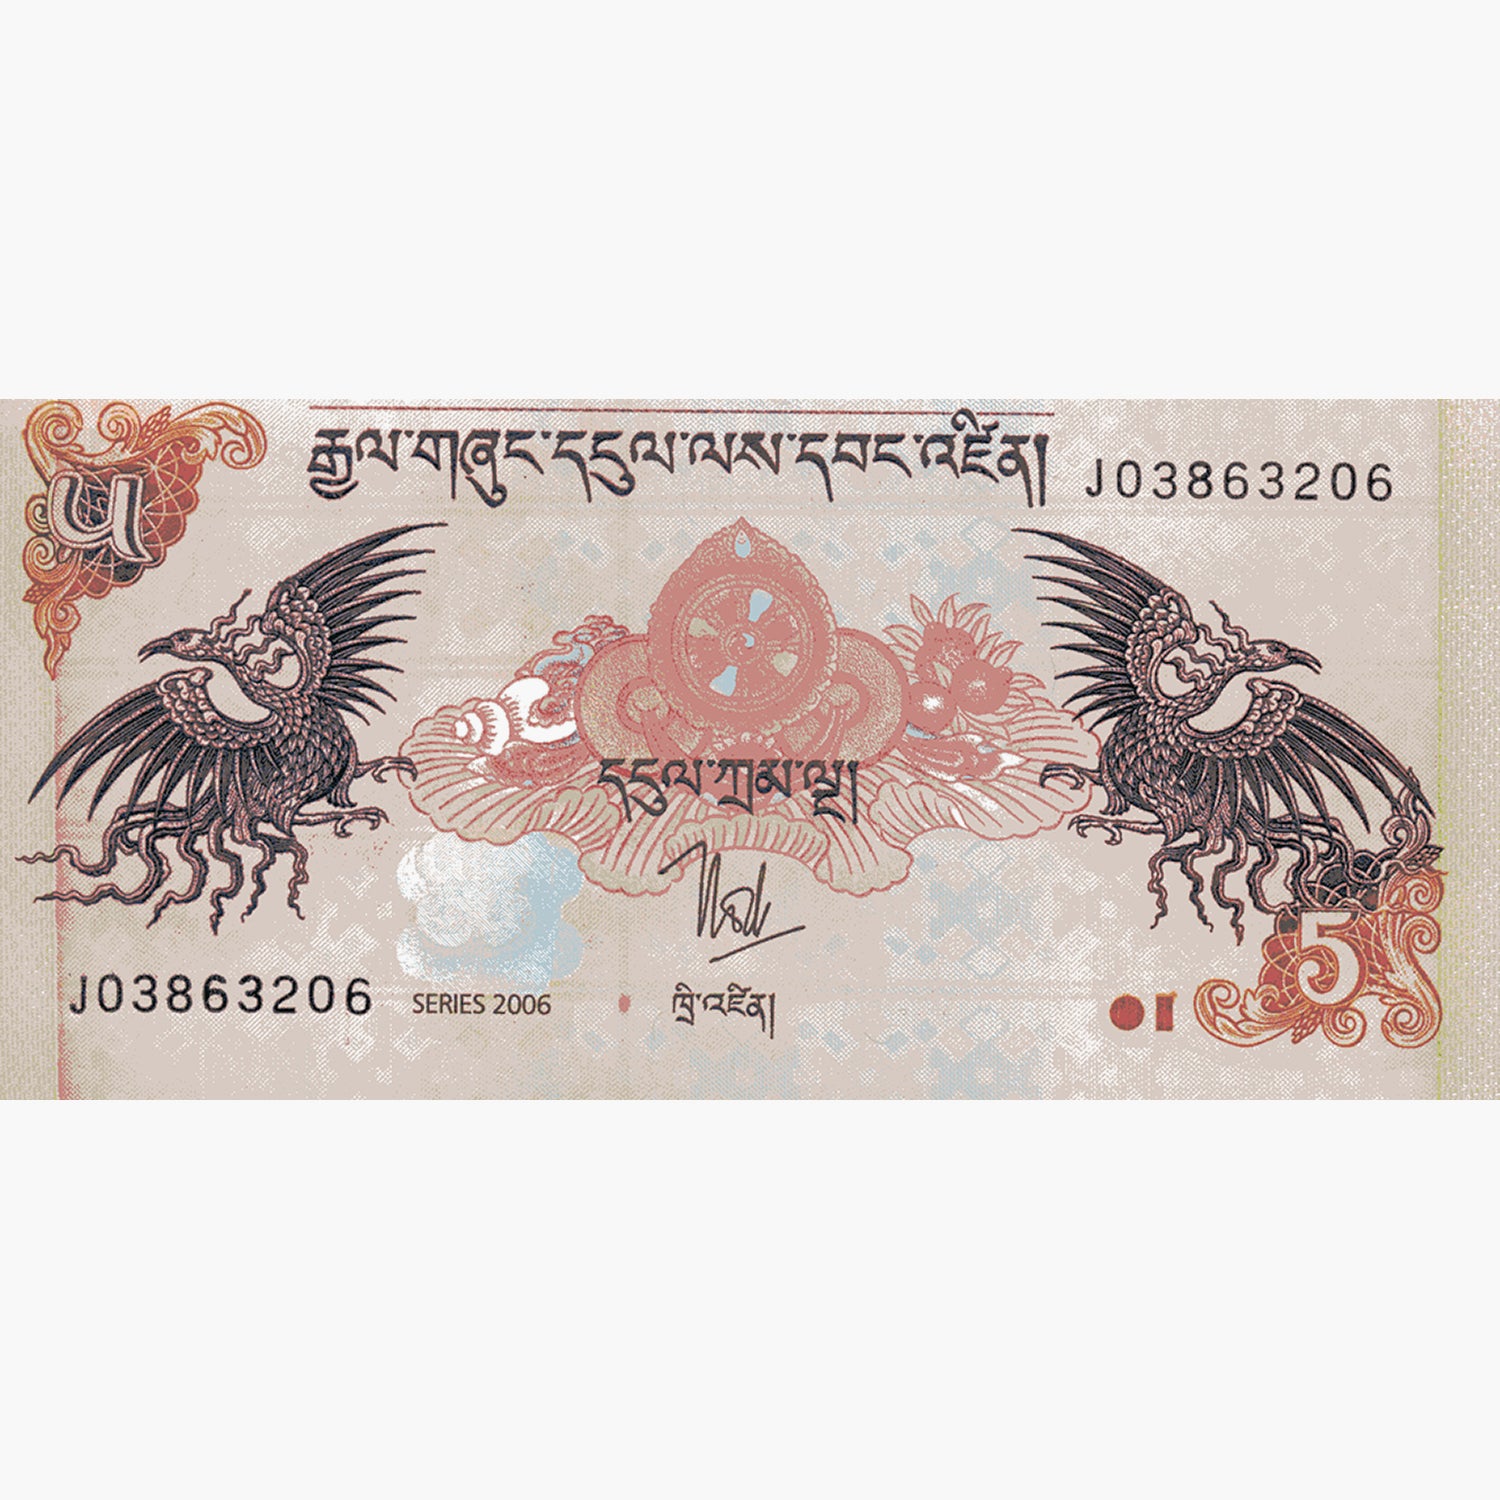 Banknote Collection "Mythical Creatures"